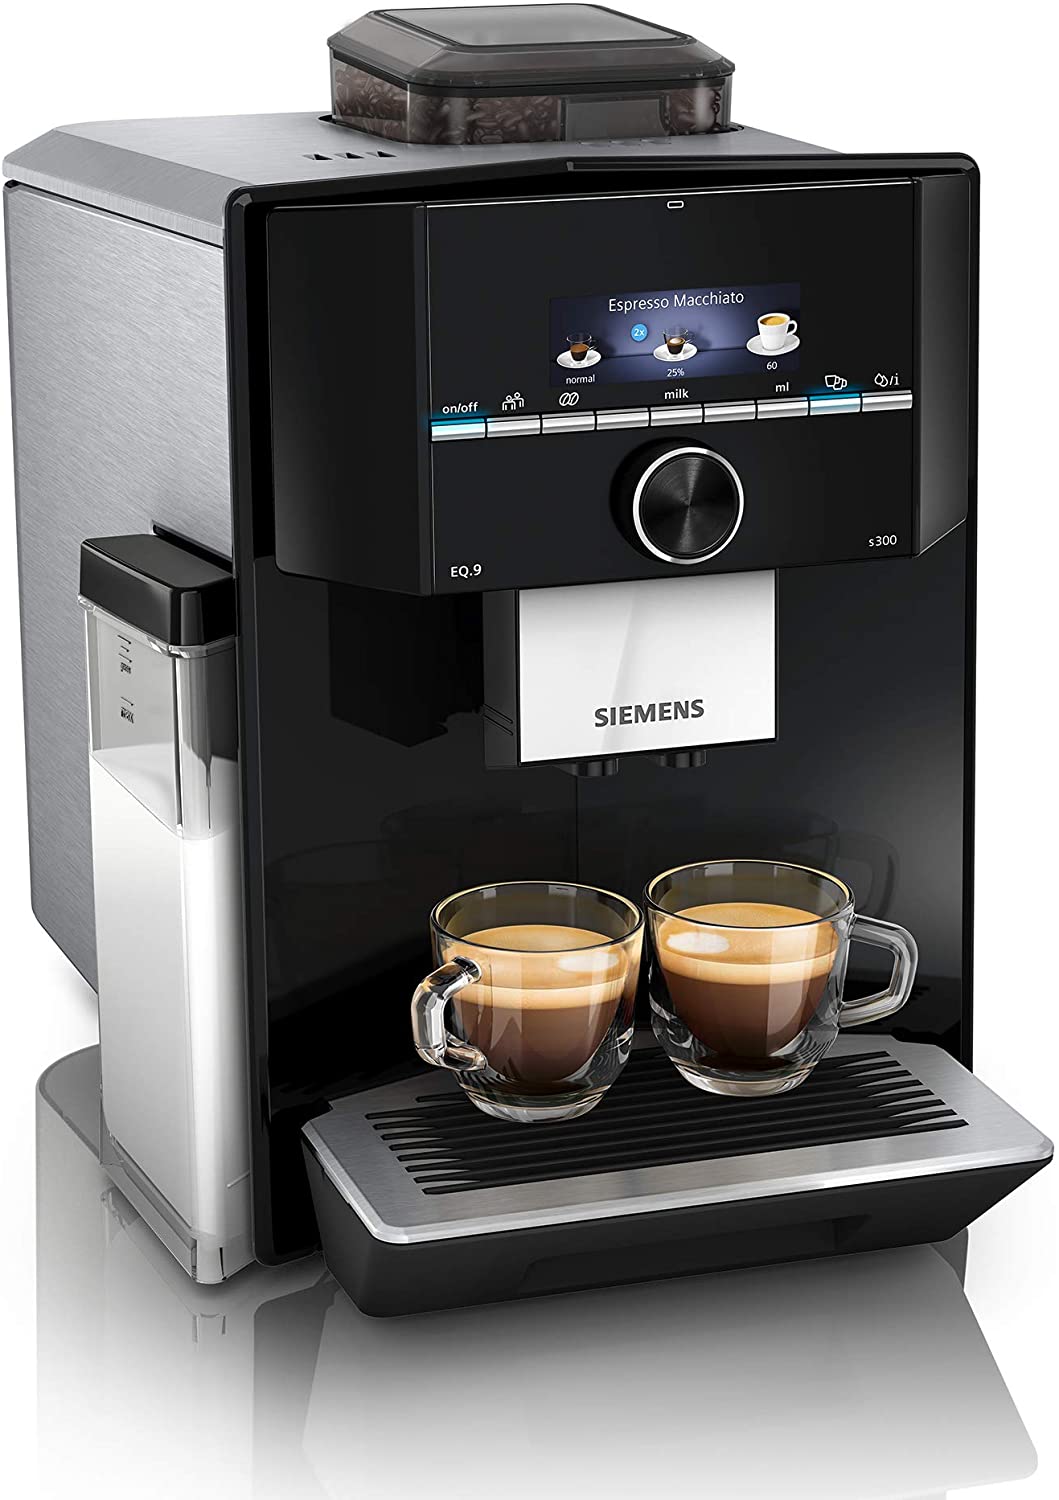 Siemens EQ.9 plus connect s500 fully automatic coffee machine TI9558X1DE, automatic cleaning, personalization, extra quiet, 1,500 watts, stainless steel